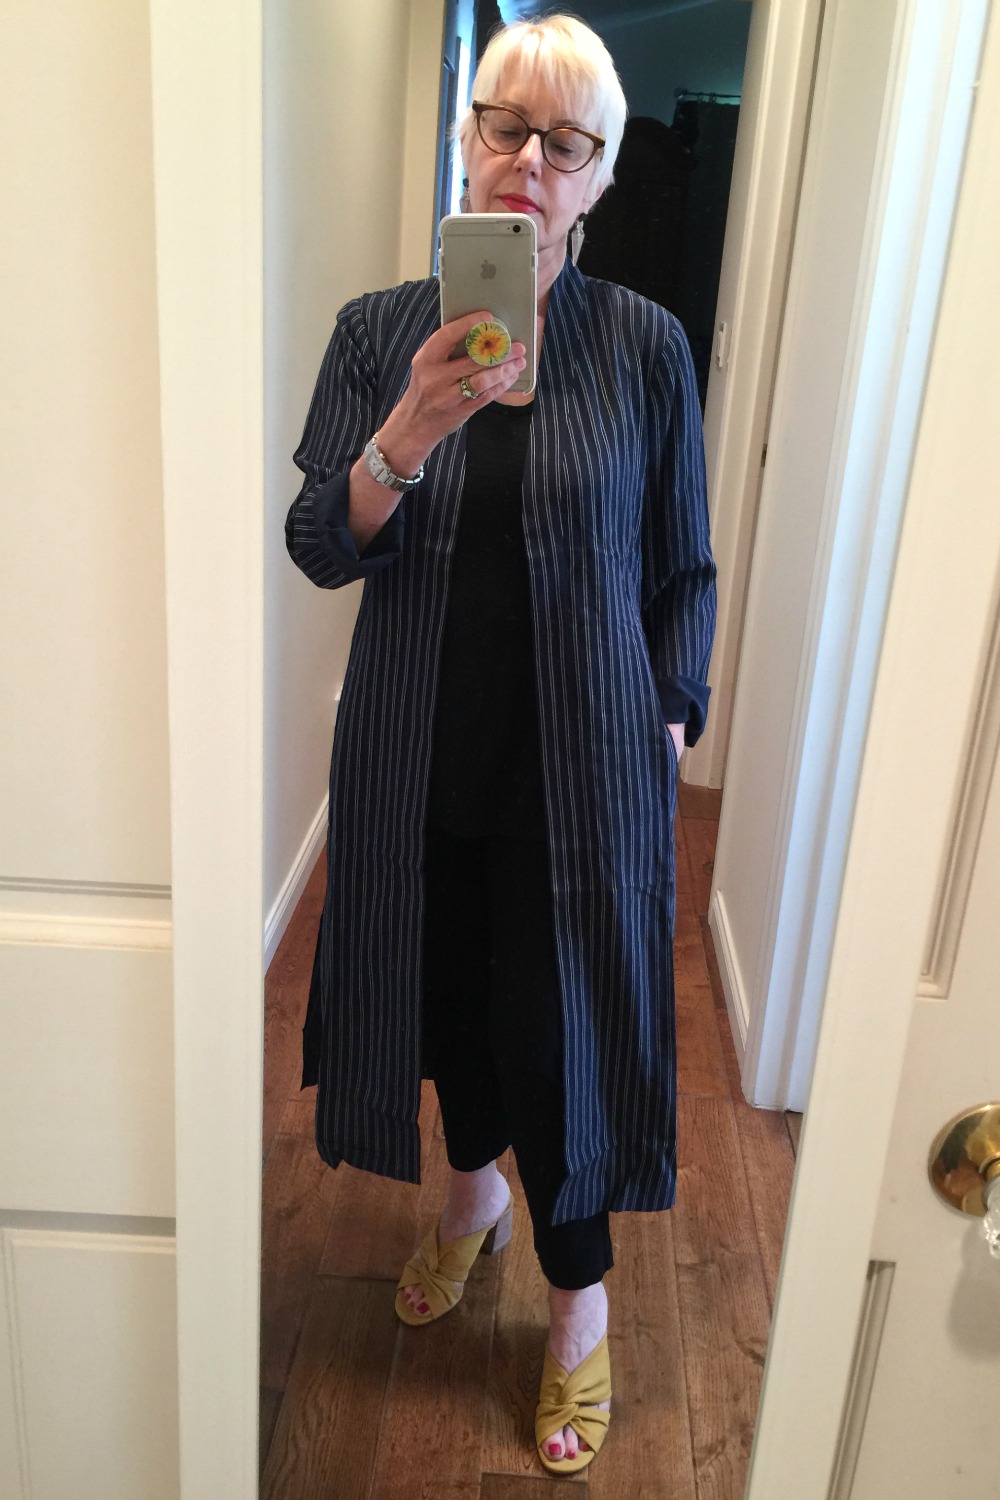 Style blogger Susan B. tries on a striped duster jacket from Nordstrom Anniversary Sale. Details at une femme d'un certain age.